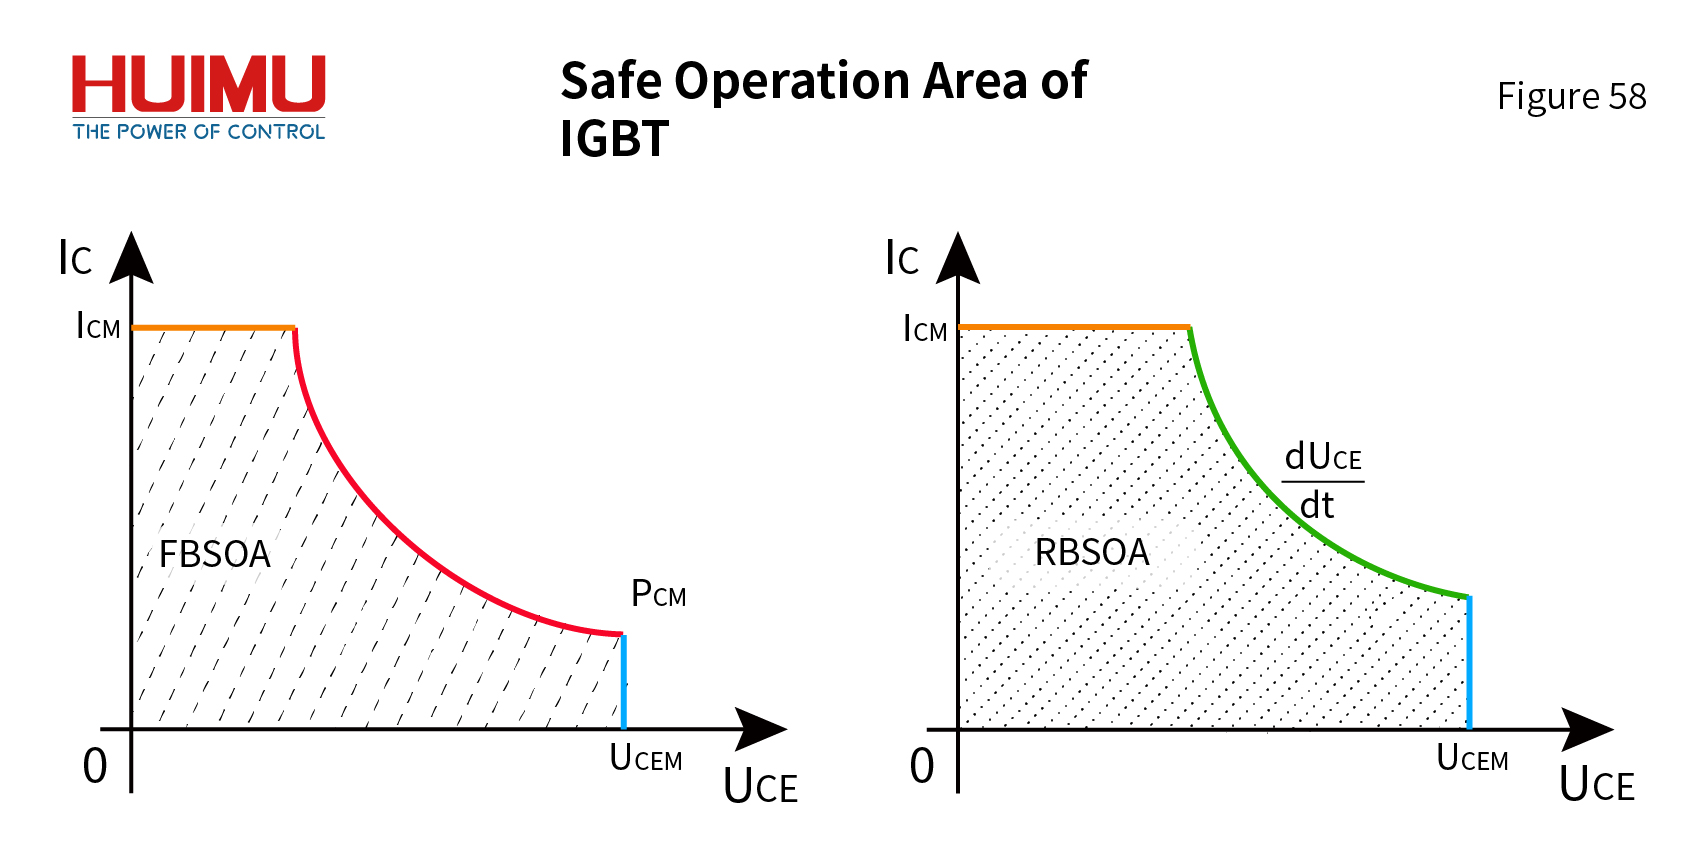 Safe Operating Area of IGBT